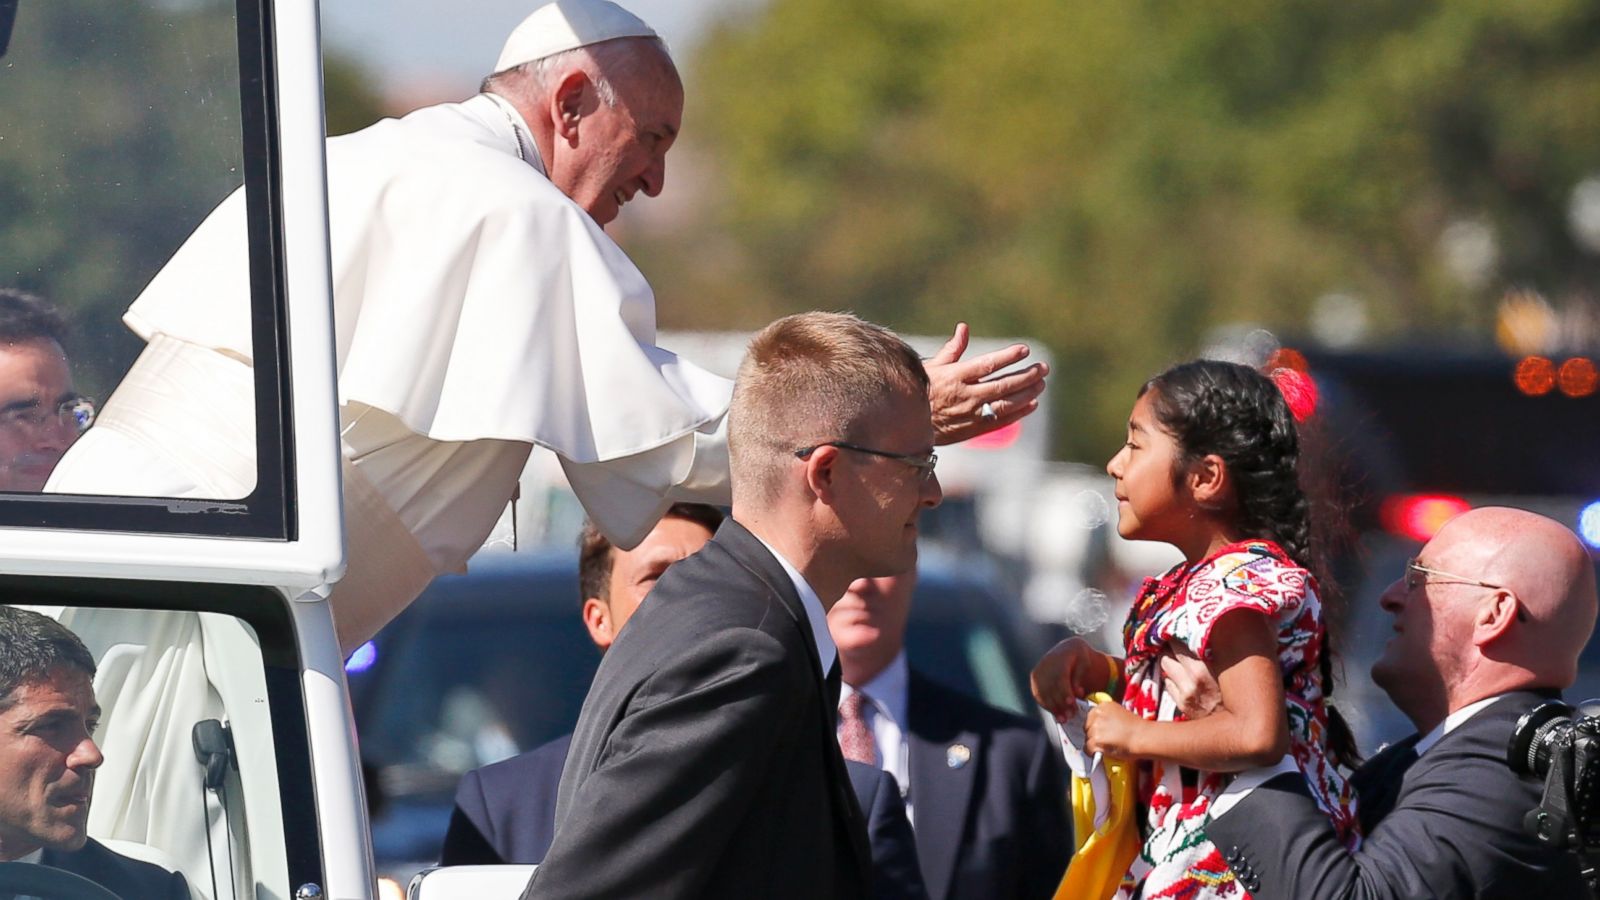 greb begynde alligevel Meet the Little Girl Blessed by Pope Francis - ABC News